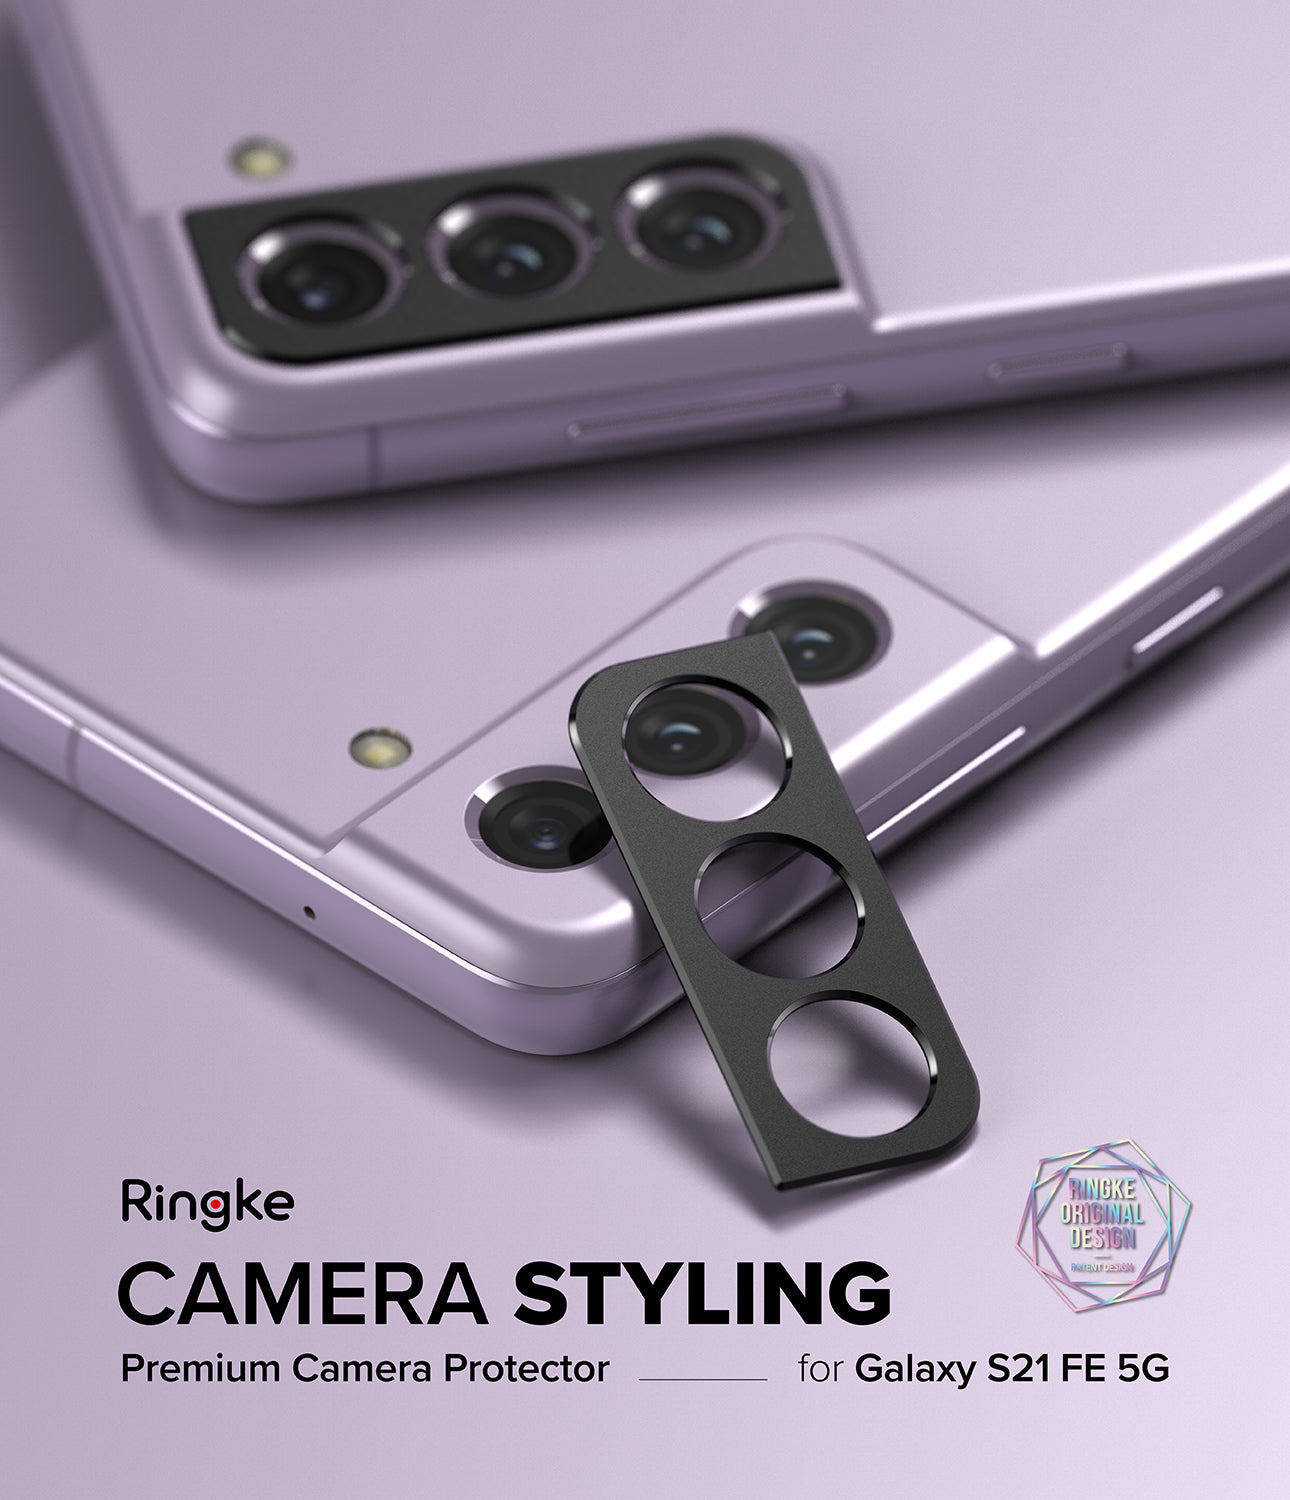 Galaxy S21 FE | Camera Styling - Ringke Official Store